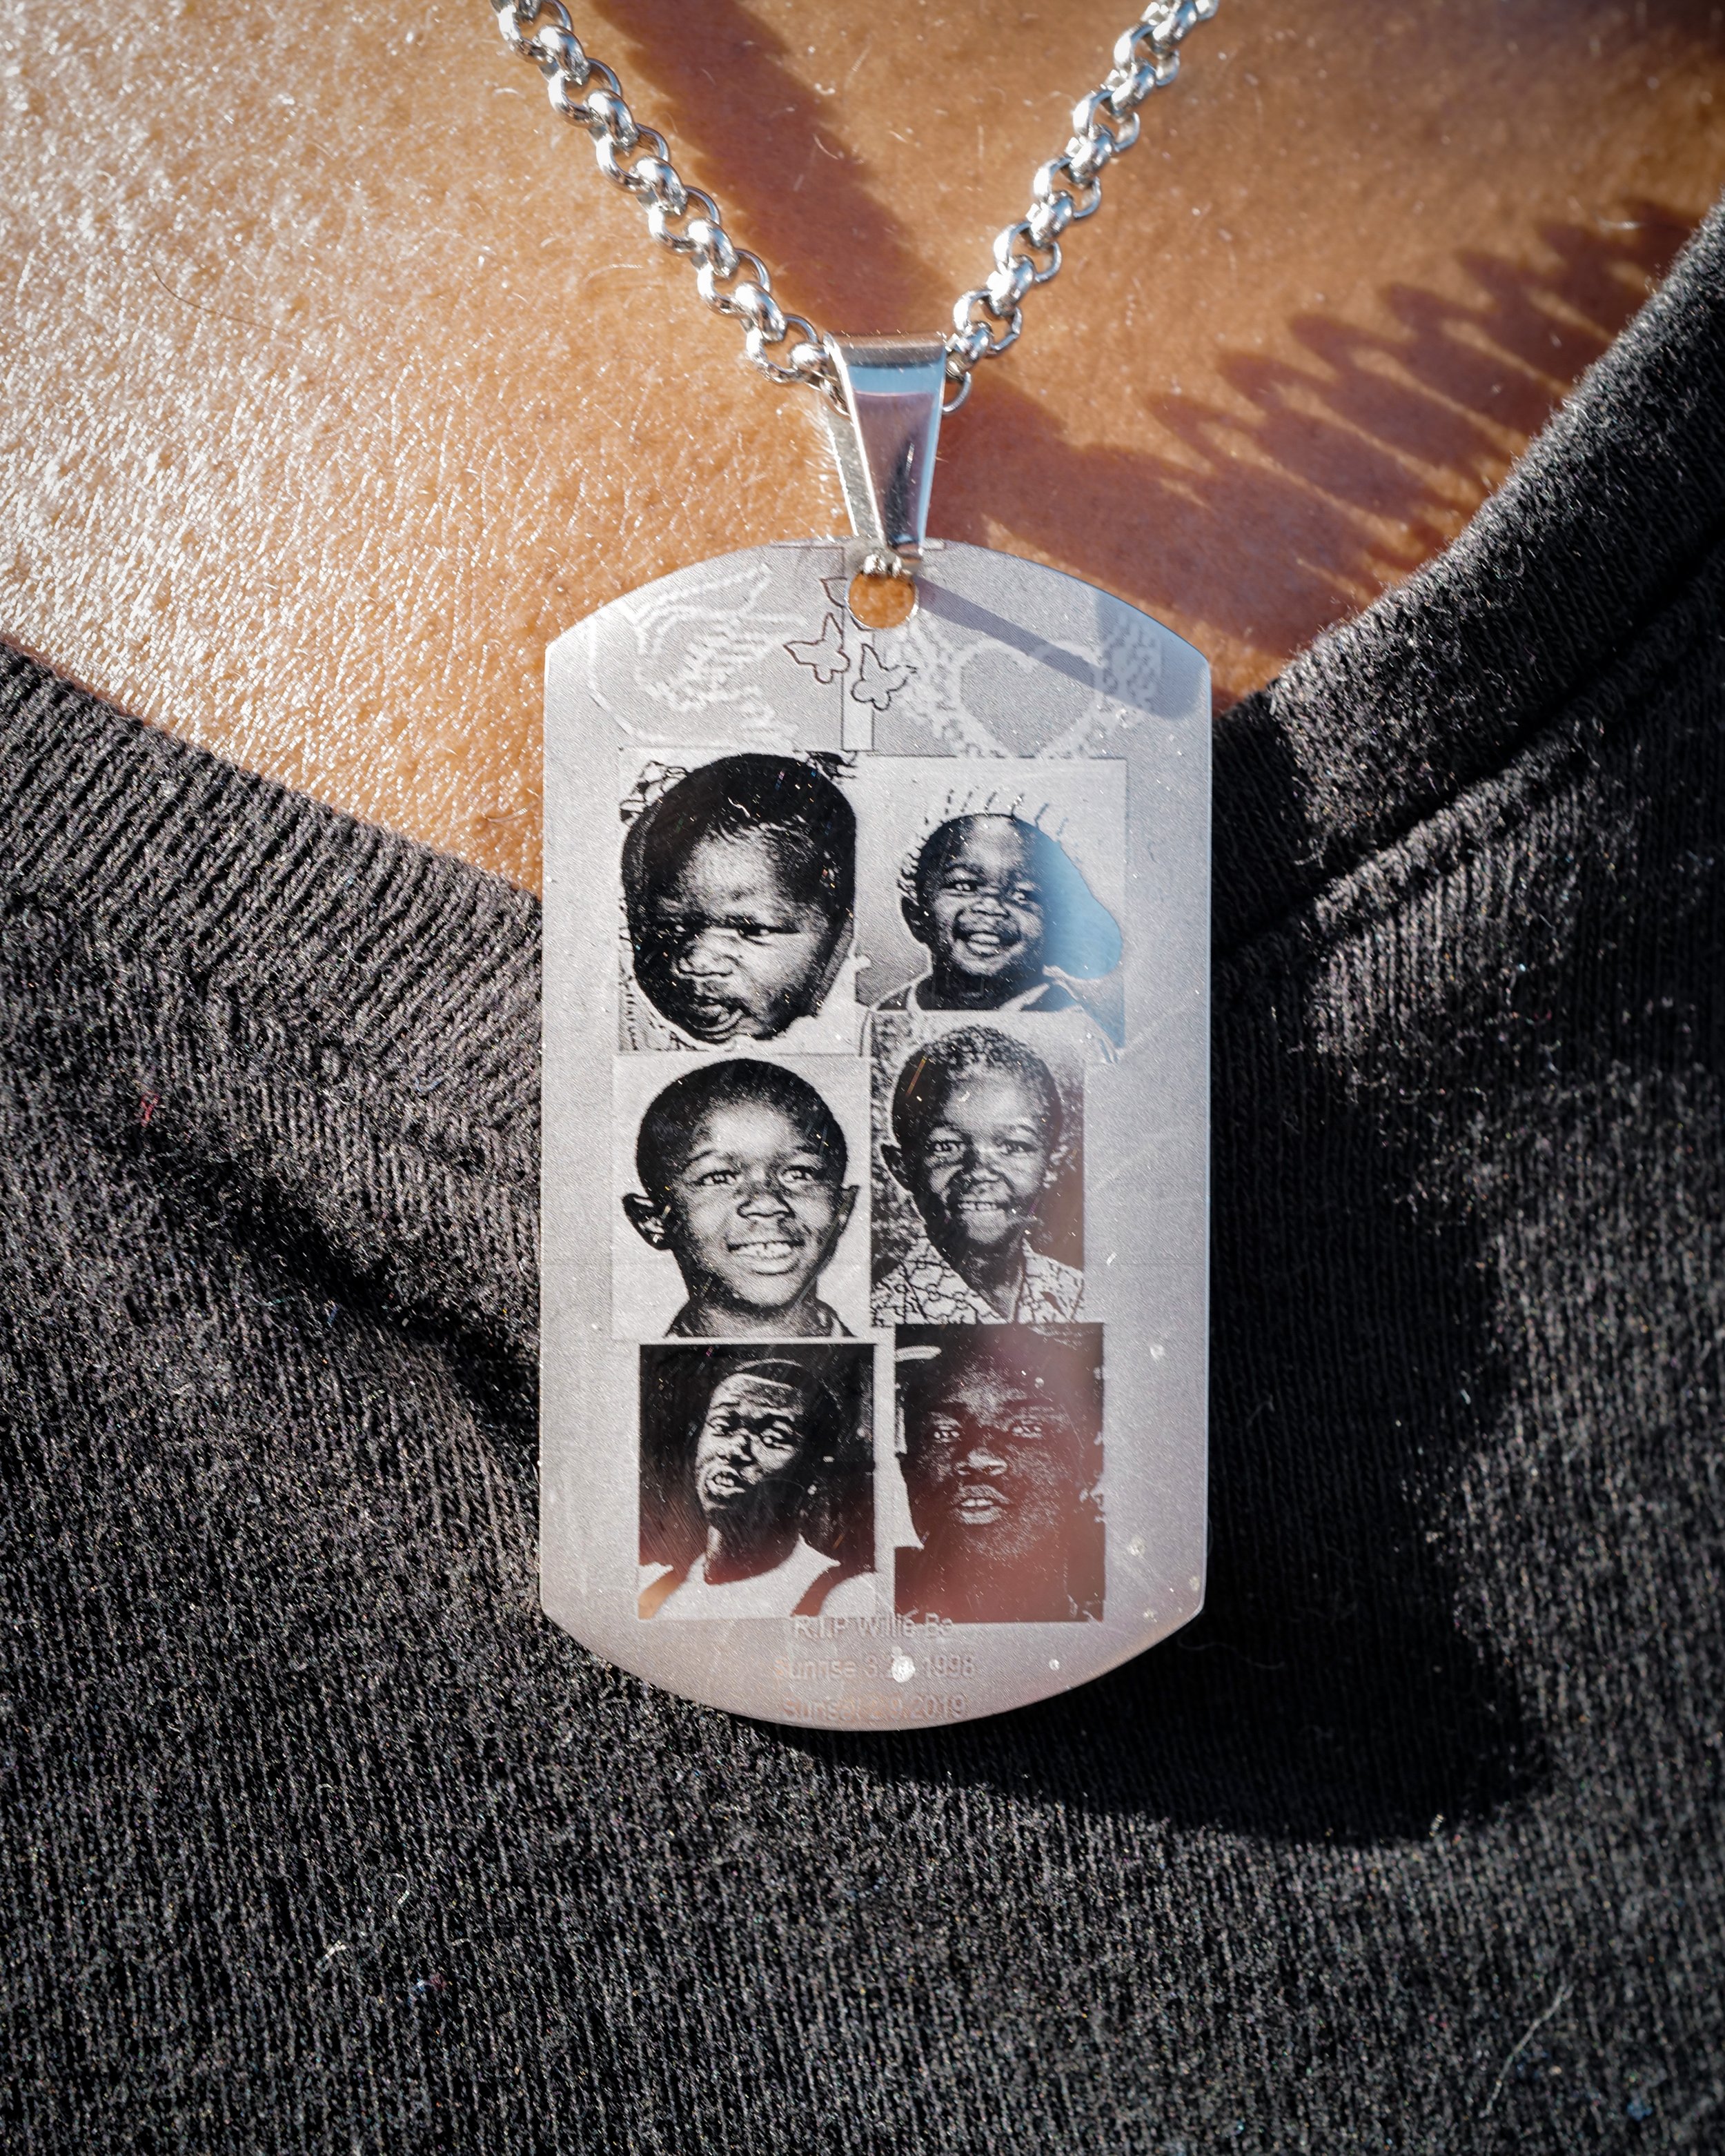  Willie McCoy’s aunt wears a necklace of her nephew. On February 9, 2019, 20-year-old McCoy was murdered by Vallejo police. He was asleep in his car at a Taco Bell when six officers fired 55 shots into his vehicle in just 3.5 seconds.  